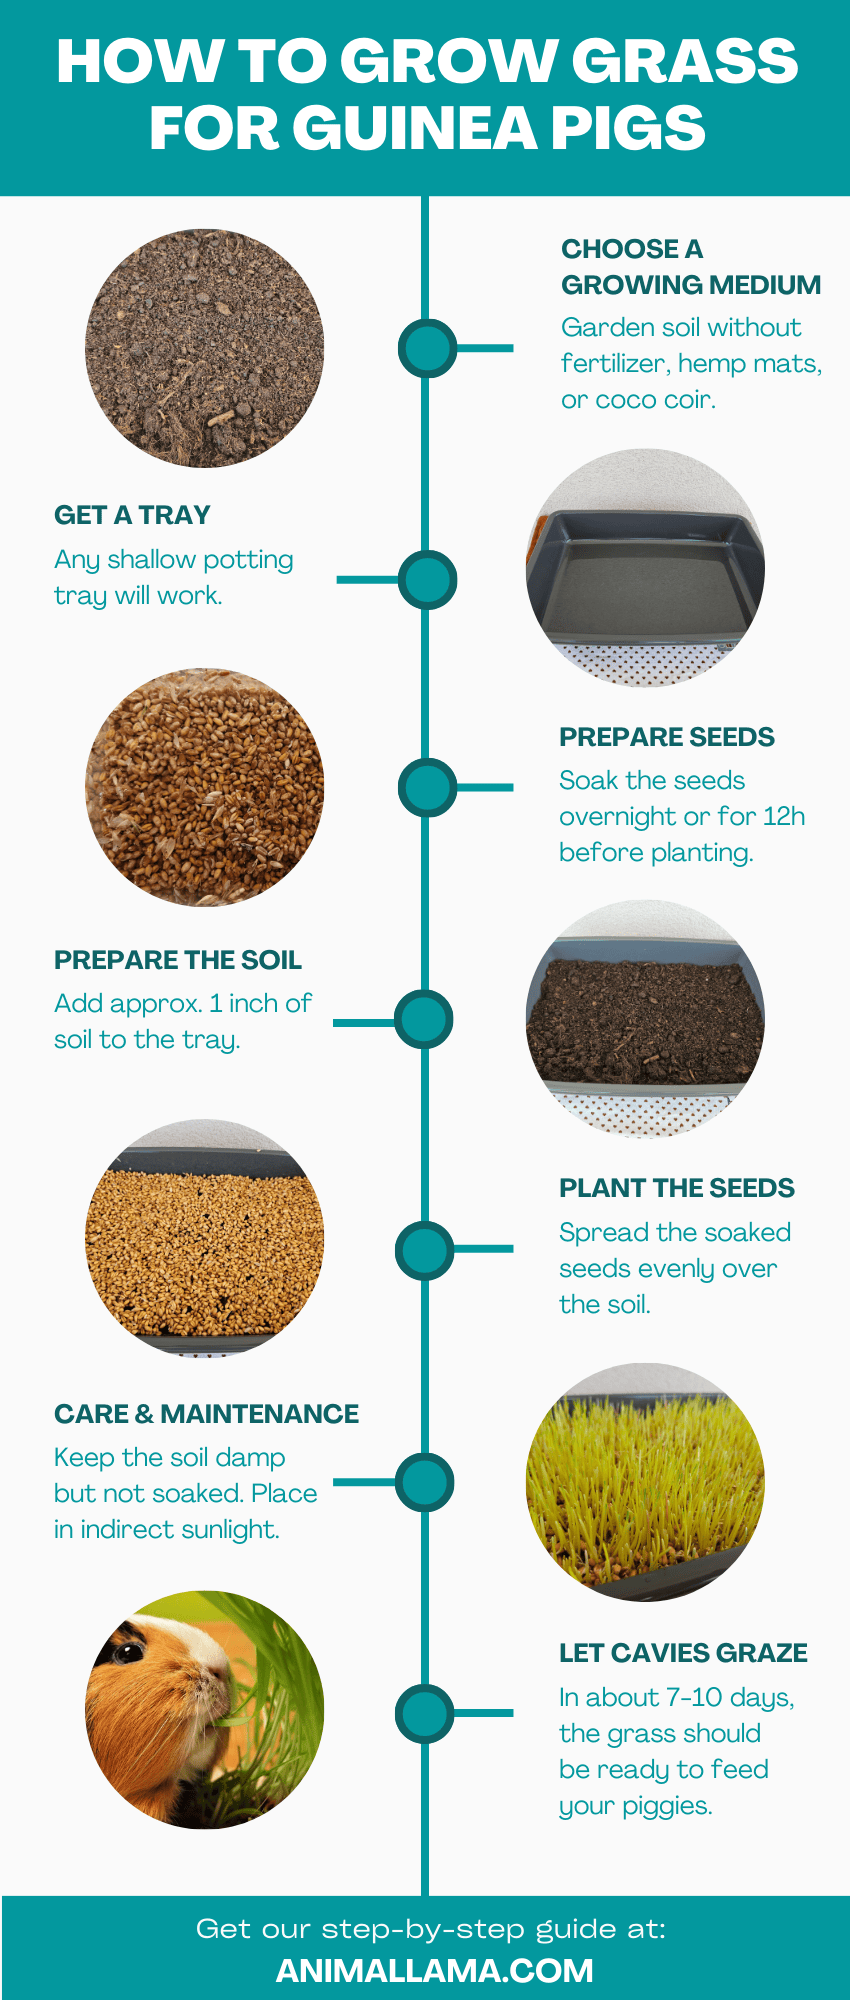 How to grow grass for guinea pigs step-by-step infographic